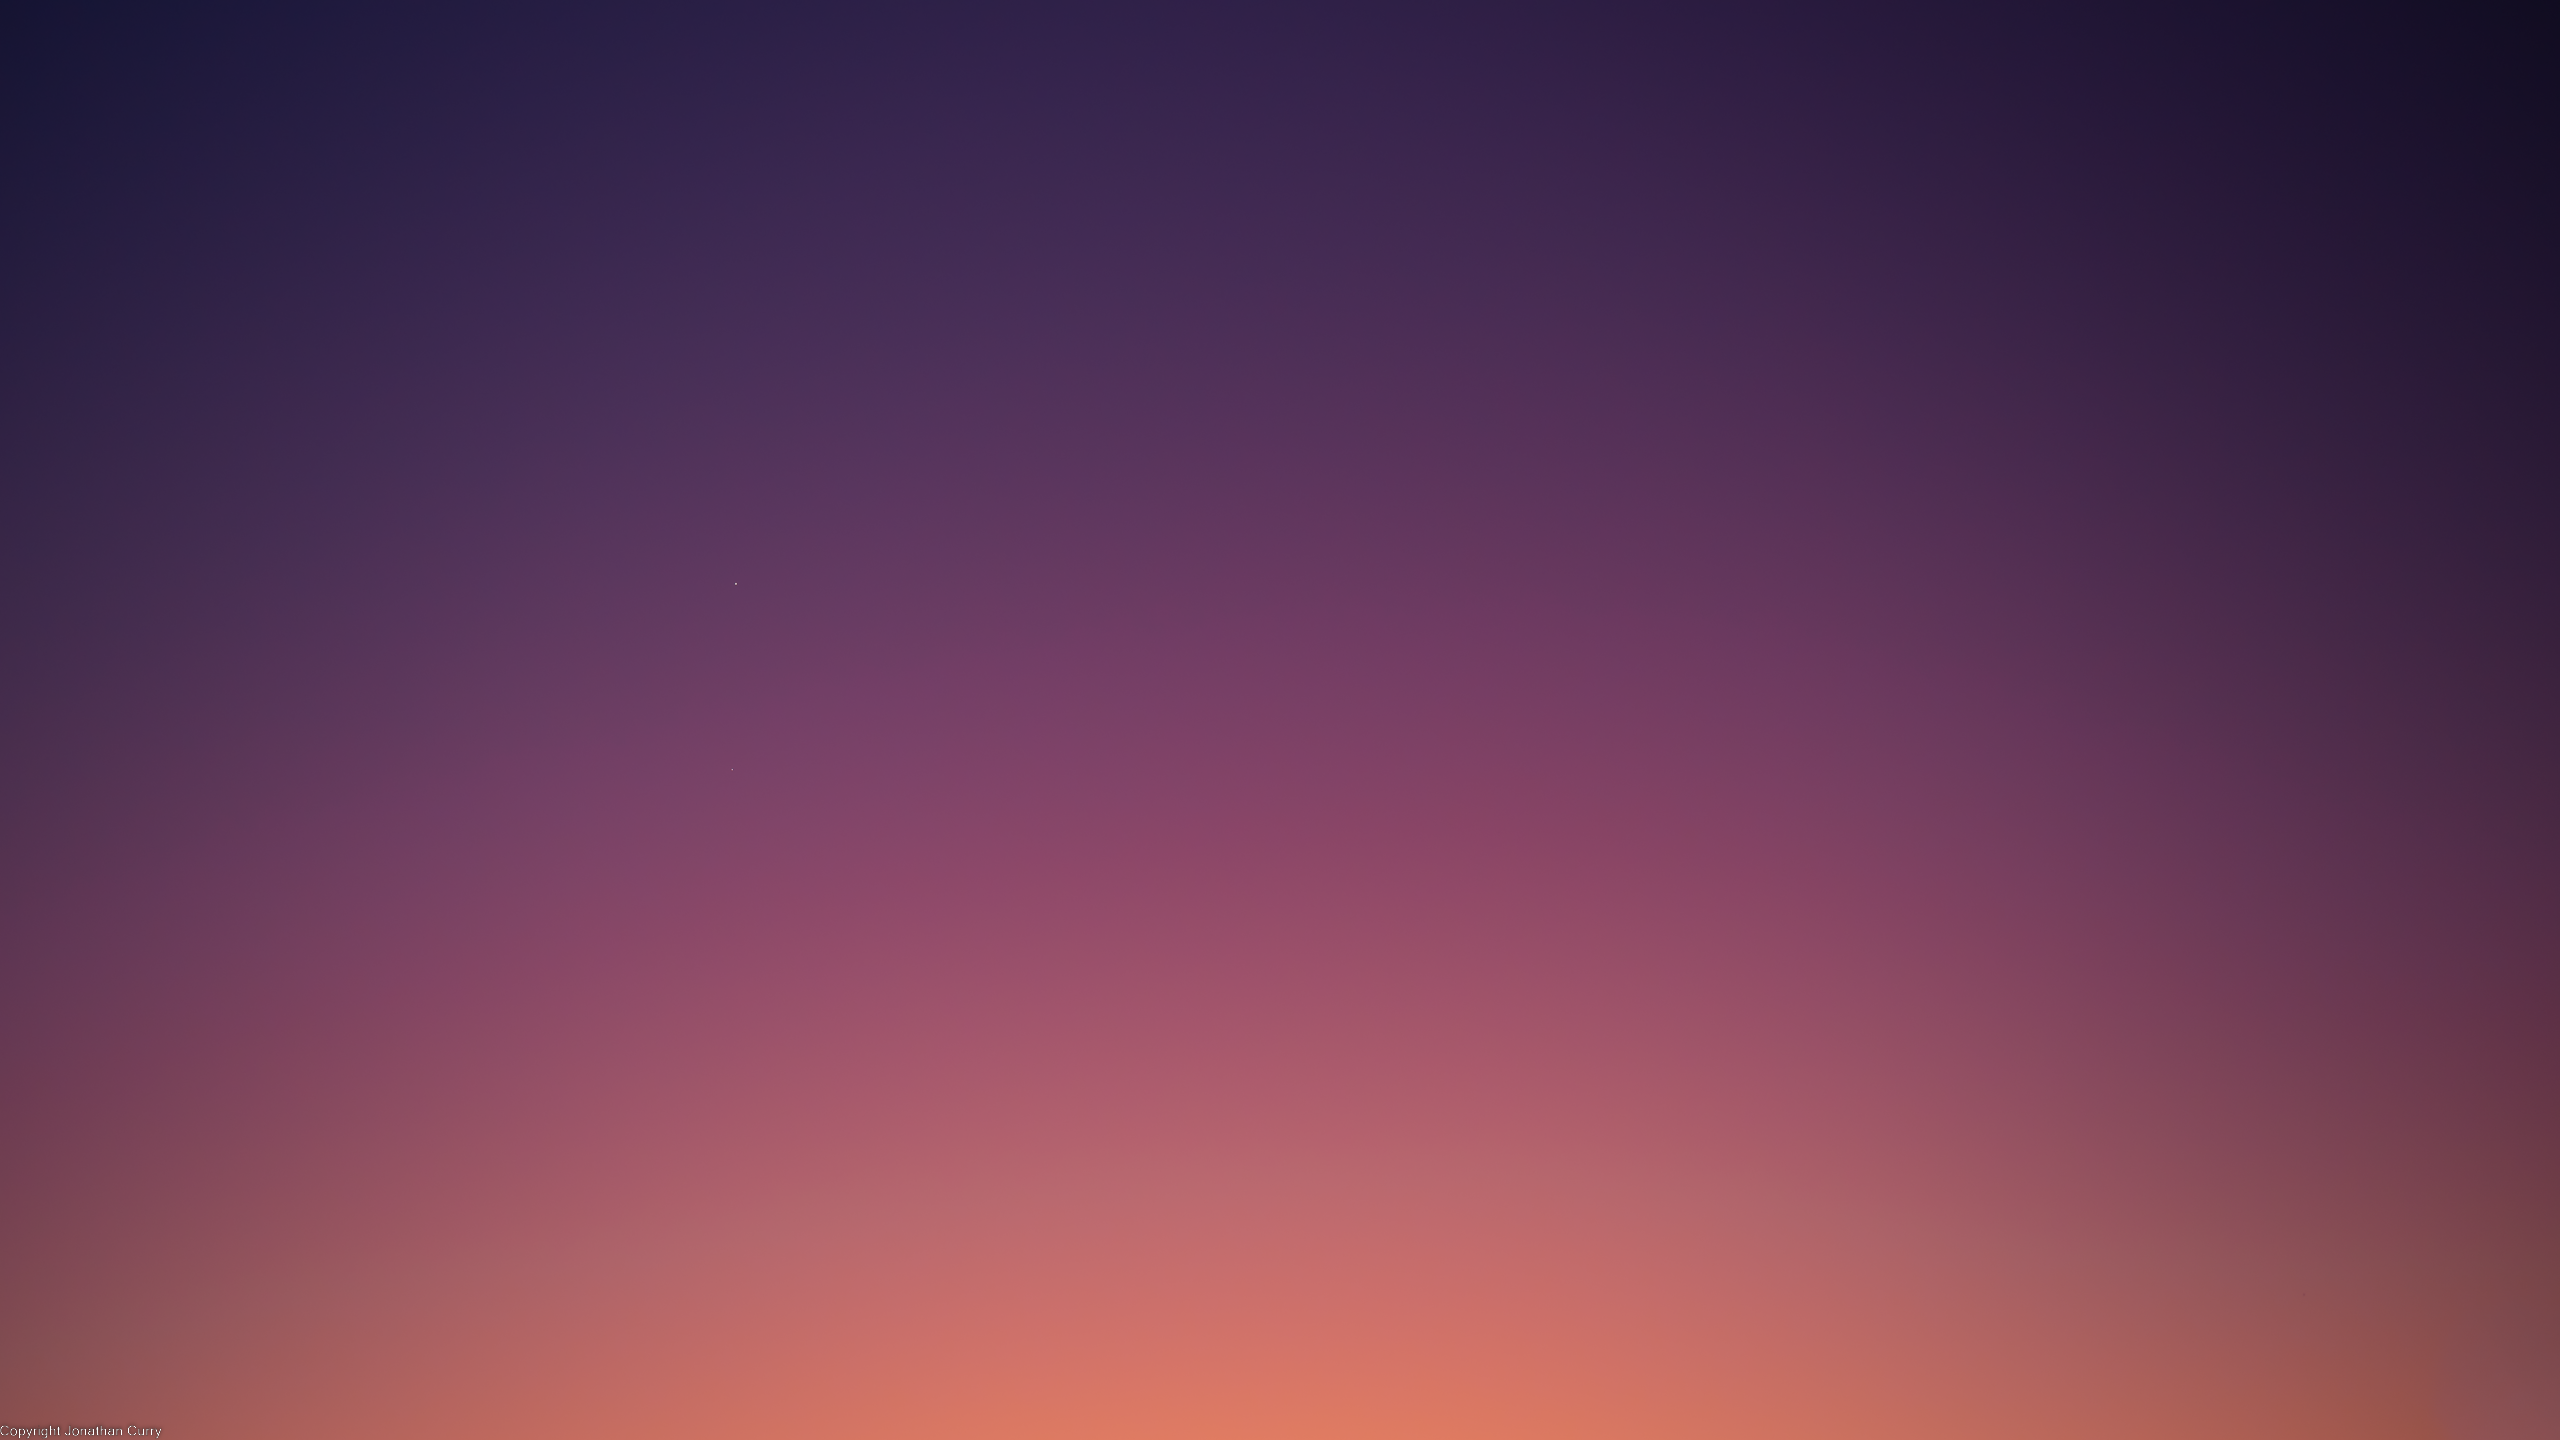 Sky Sunset Glow Sunset Nature Warm Colors Photography Outdoors Gradient Minimalism Abstract Warm Sil 2560x1440